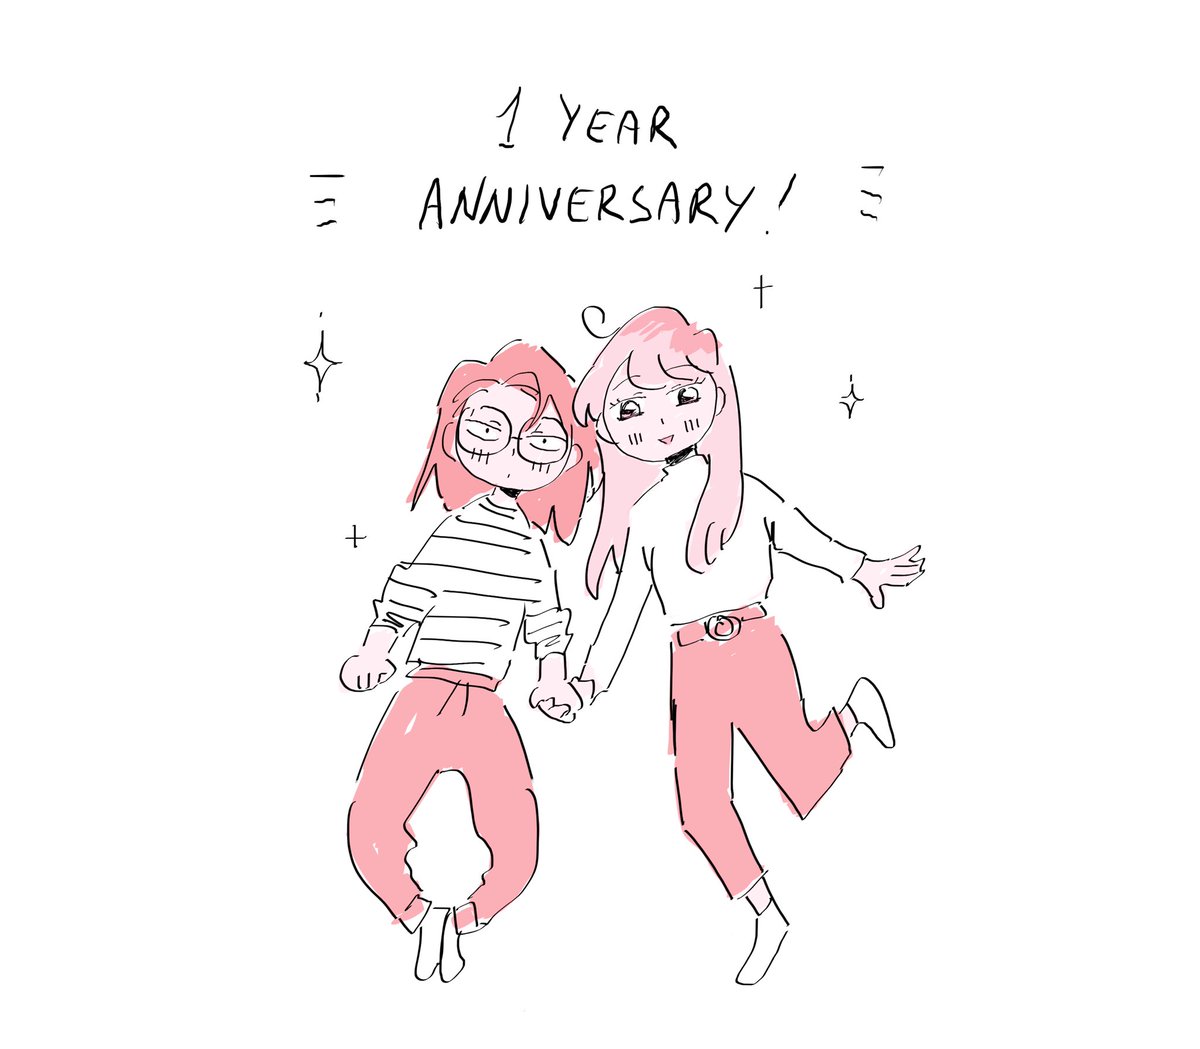 1 year anniversary with @lvx1_ !! 